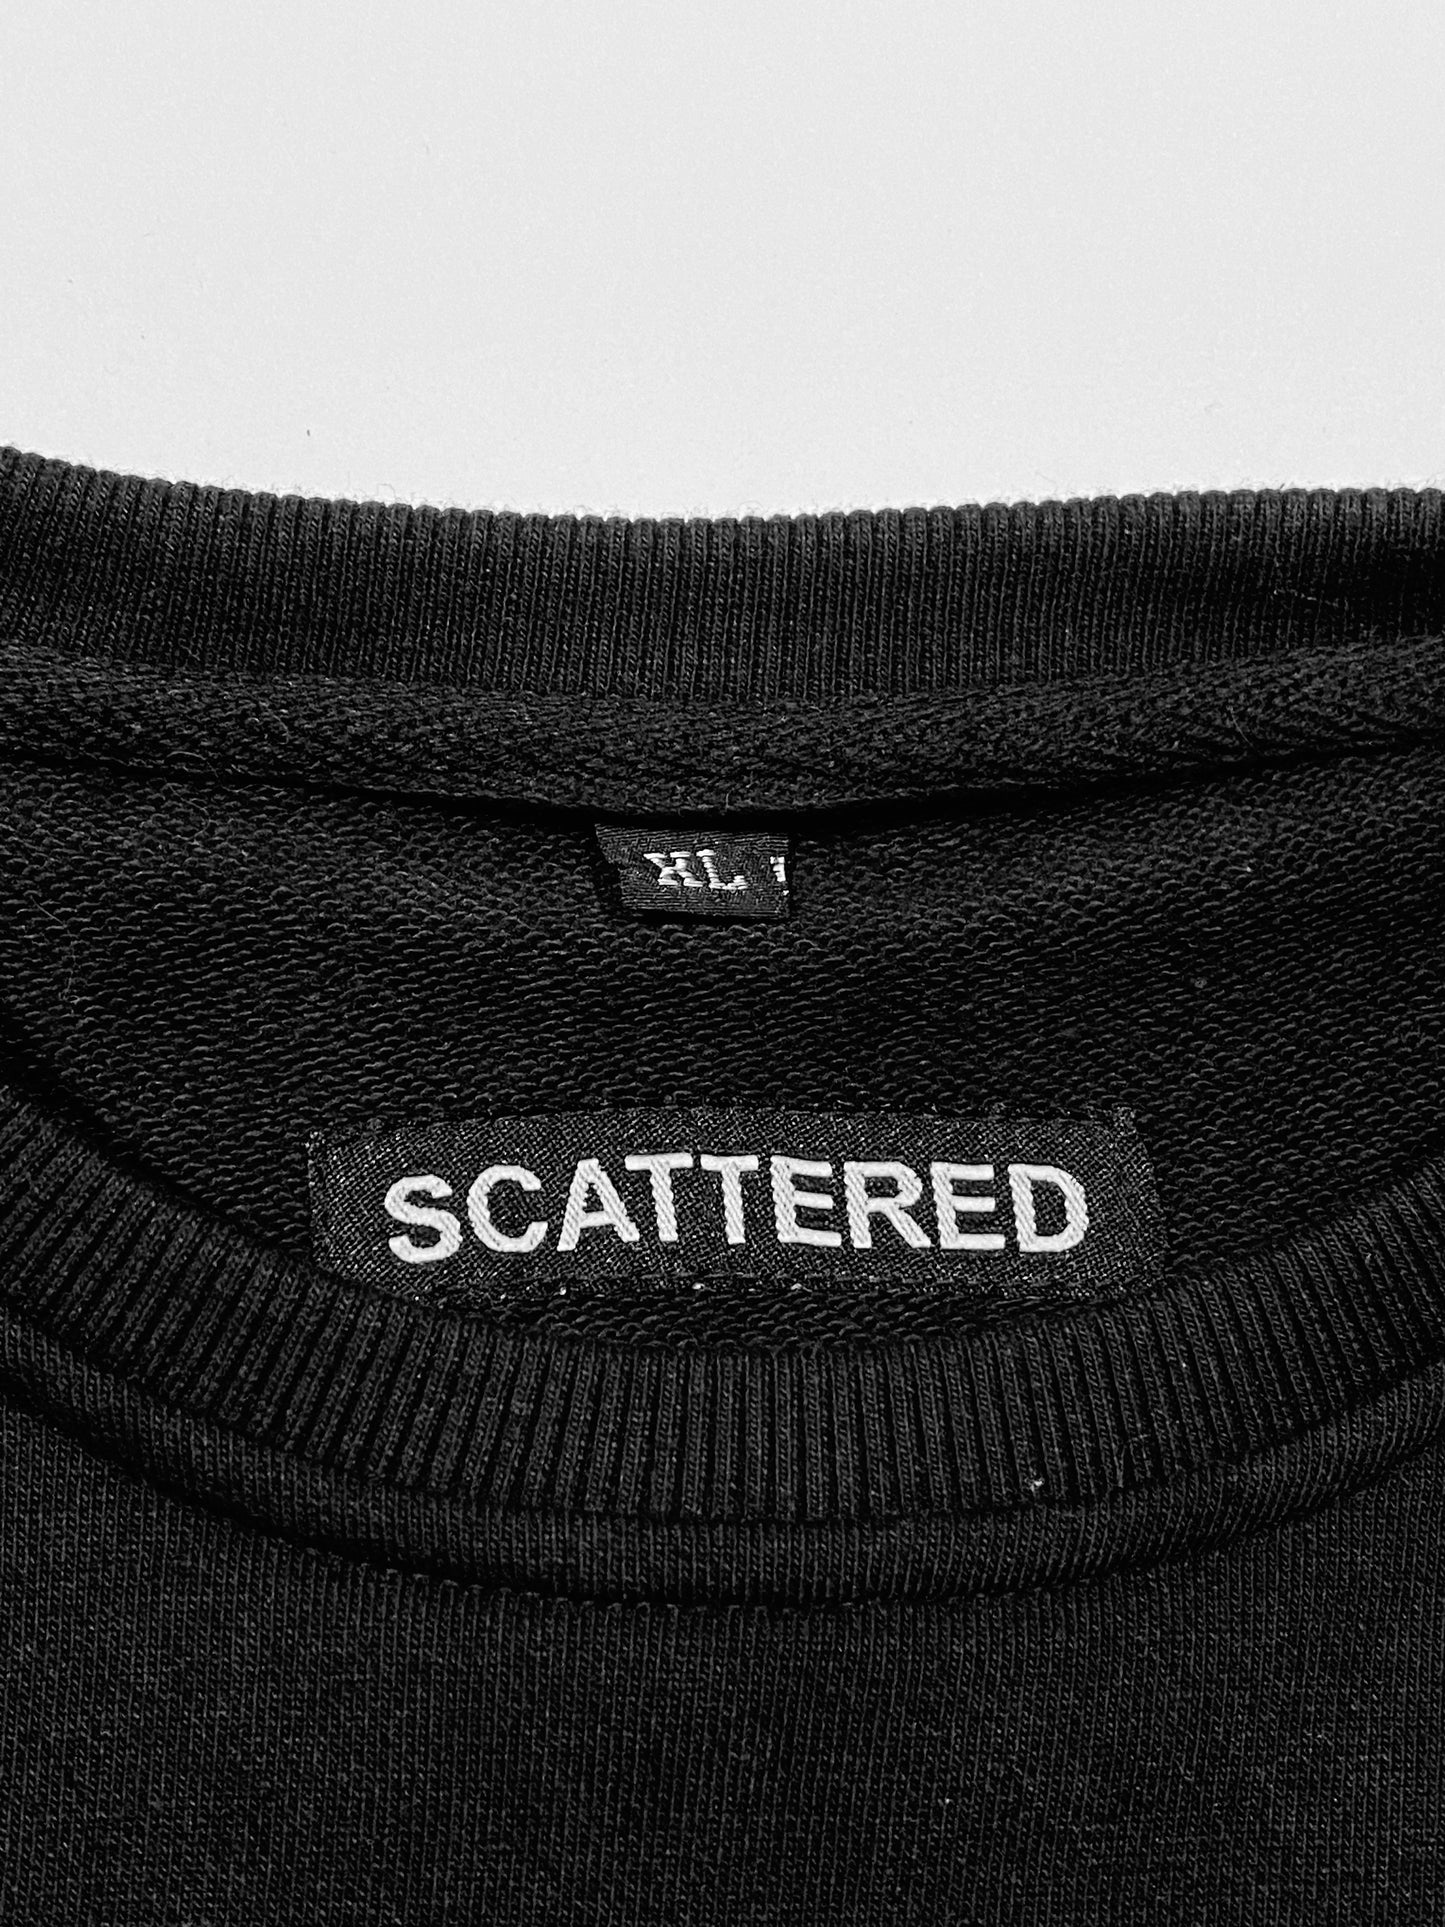 Scattered Black French Terry Sweatshirt Tag | Mens Clothing Streetwear Crewneck